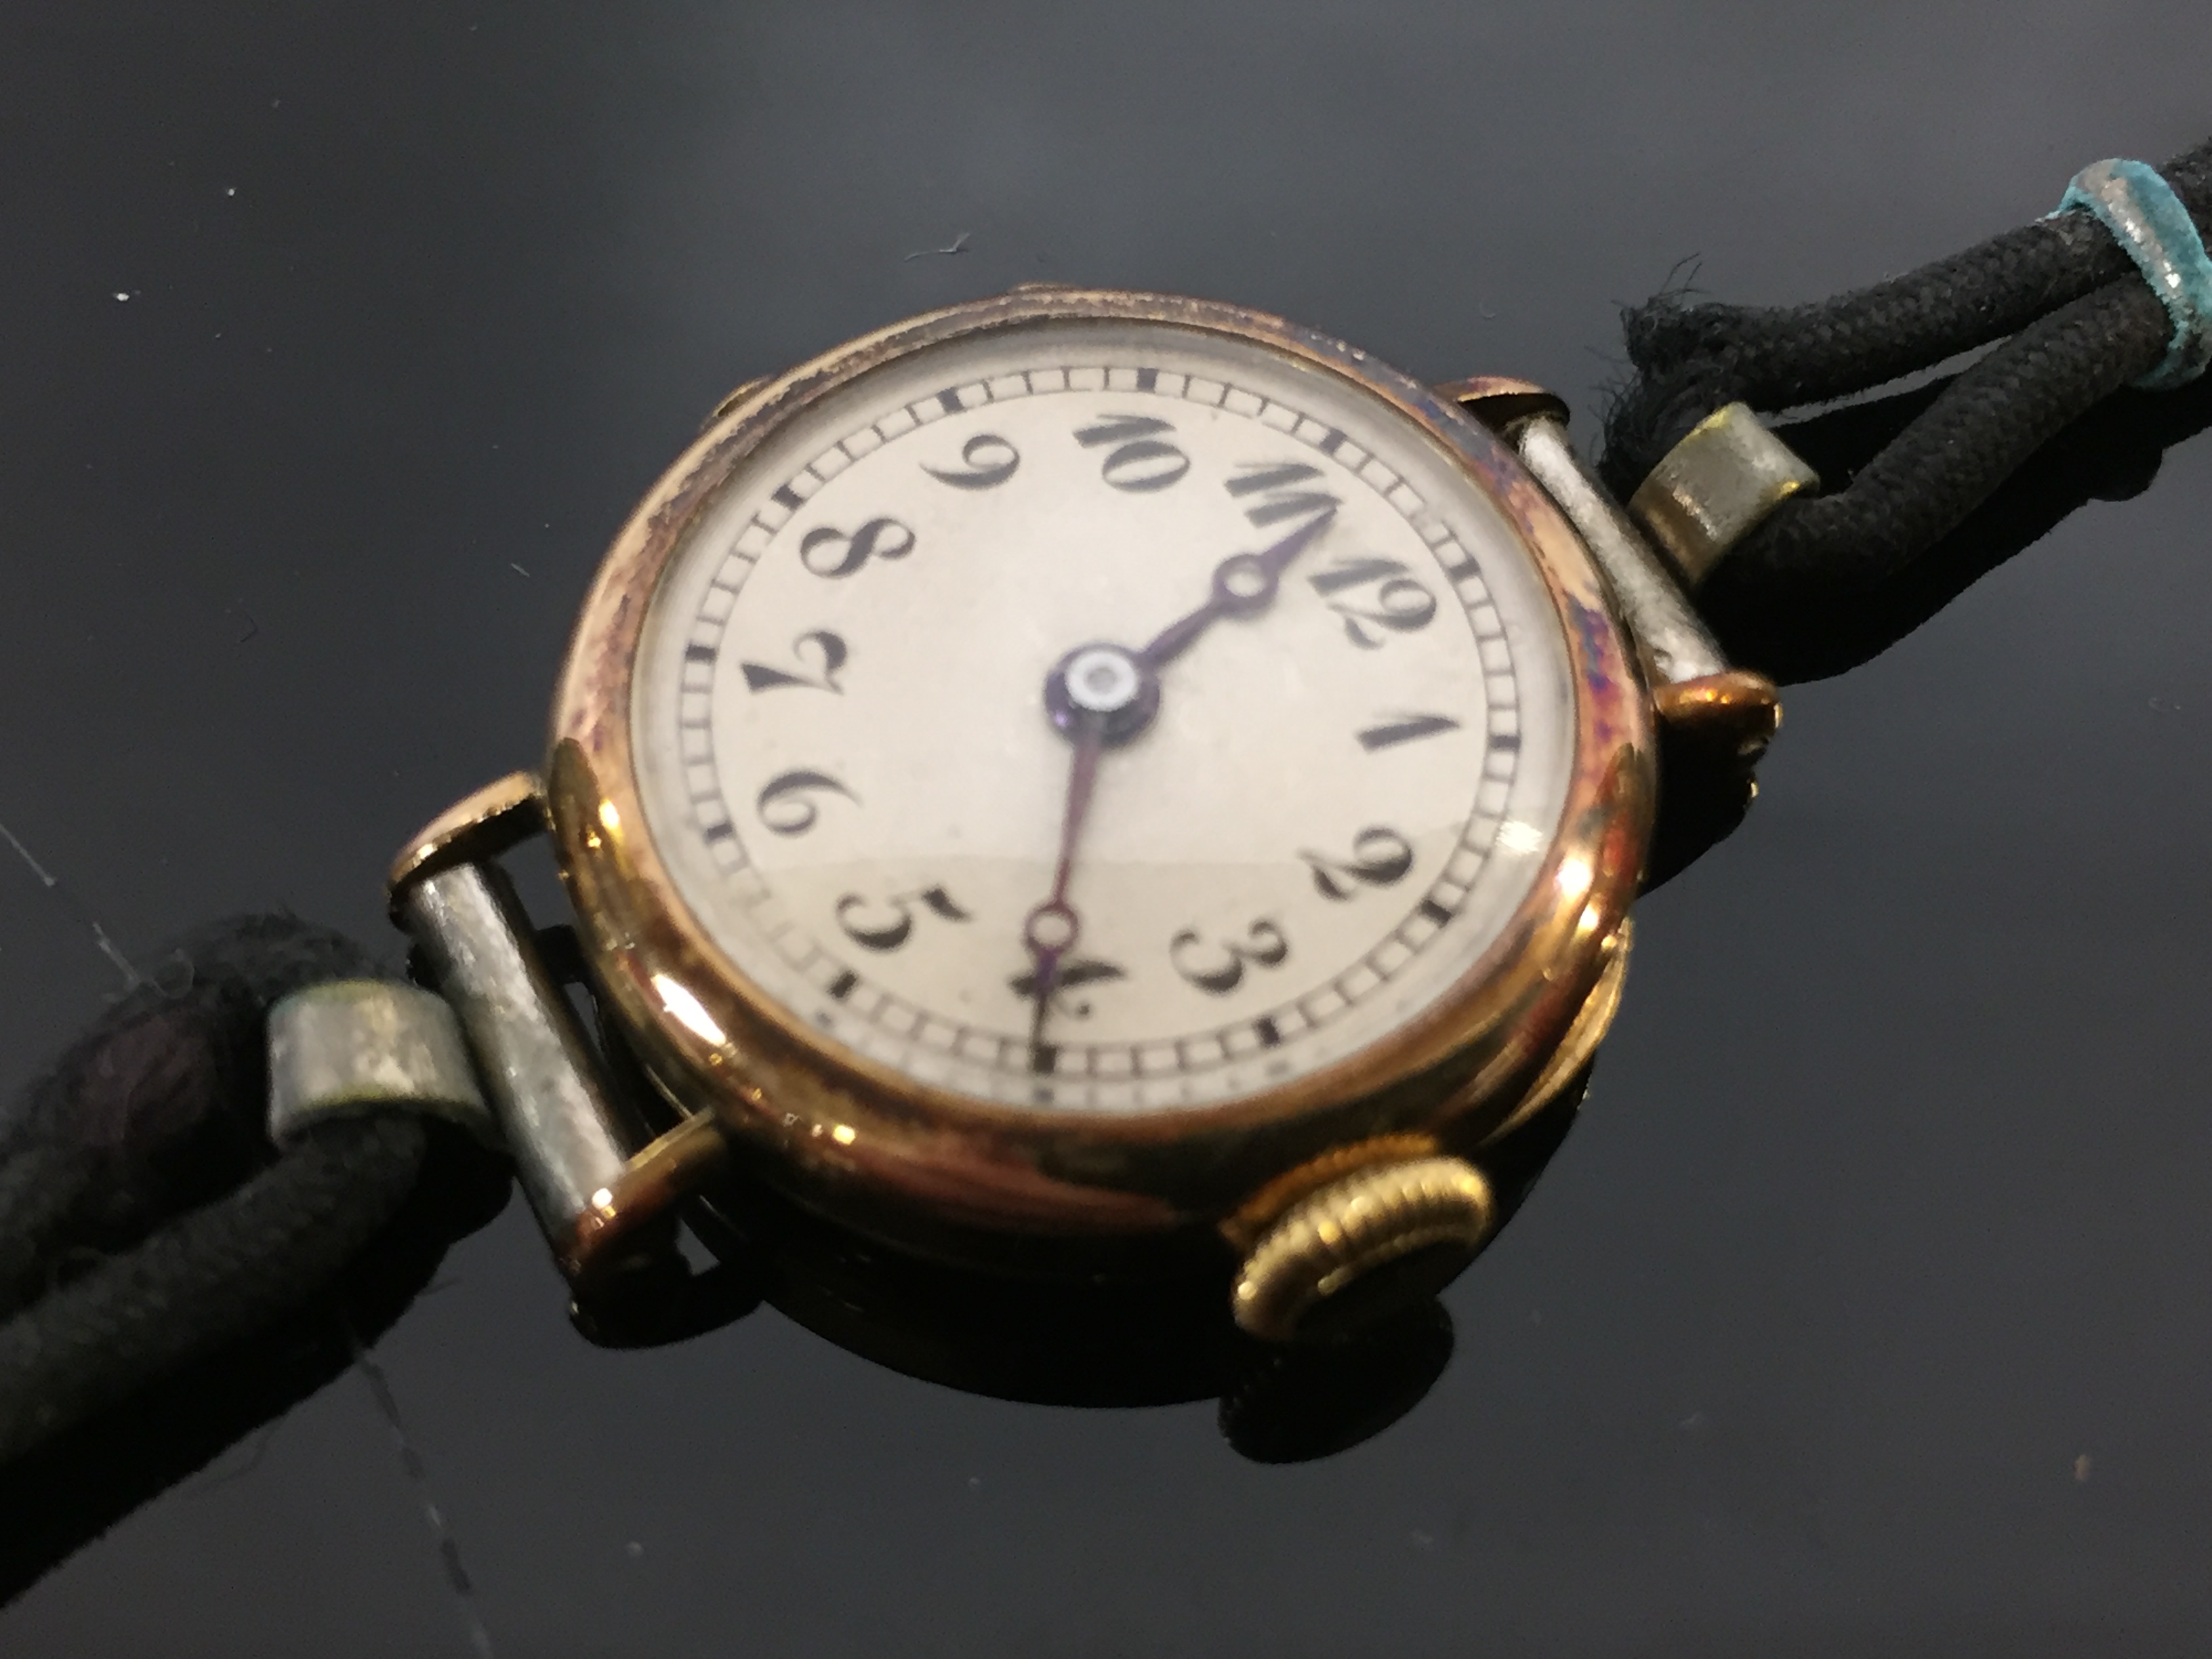 AN 18CT GOLD LADIES WRIST WATCH WITH MANUAL WINDING MOVEMENT CIRCA 1911. - Image 2 of 3